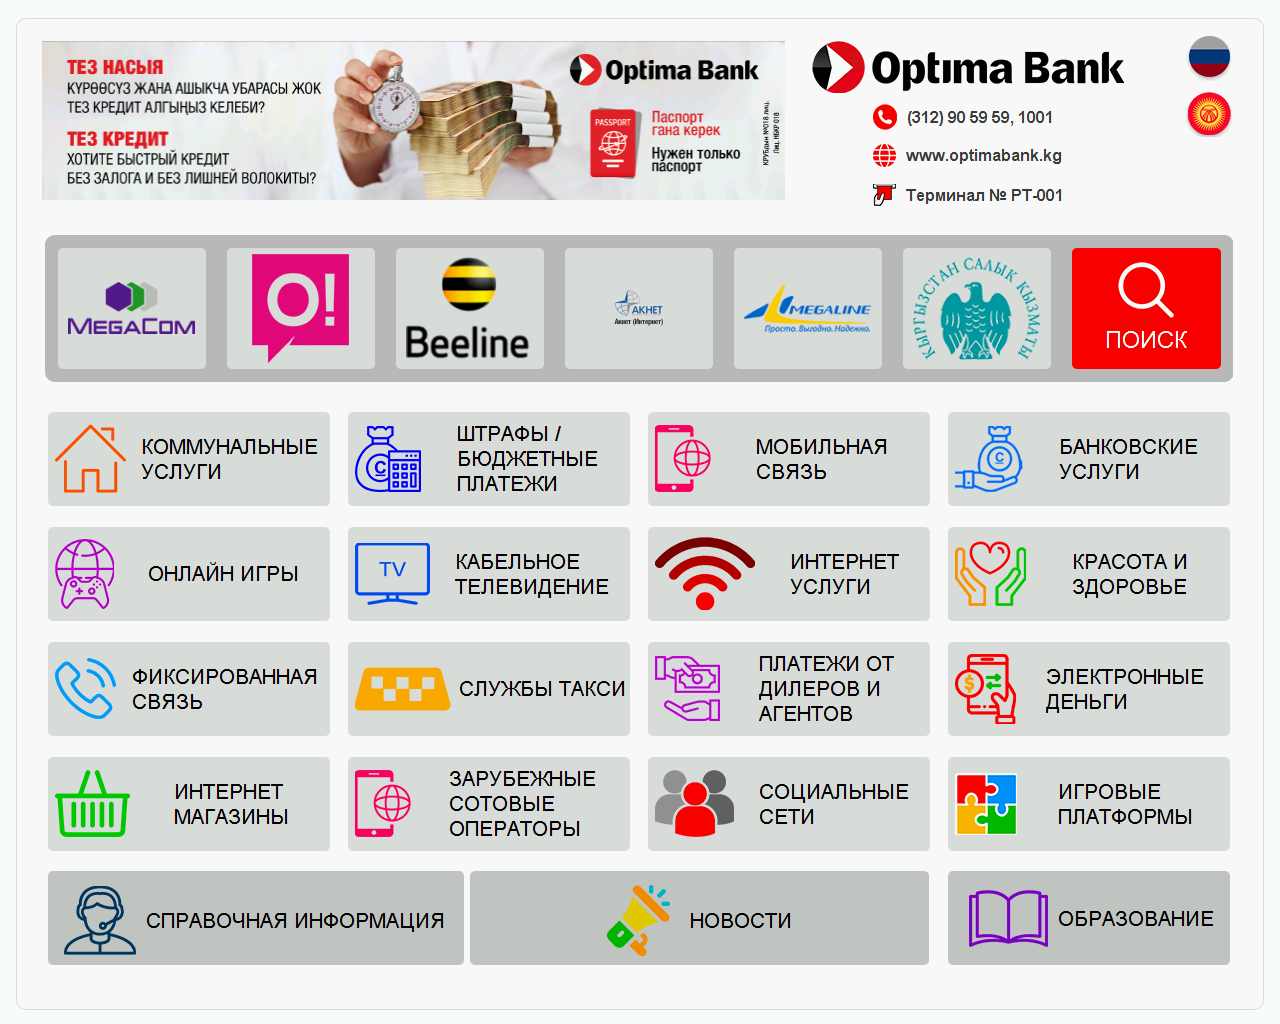 Implementation Of Pay Logic Software For Optima Bank